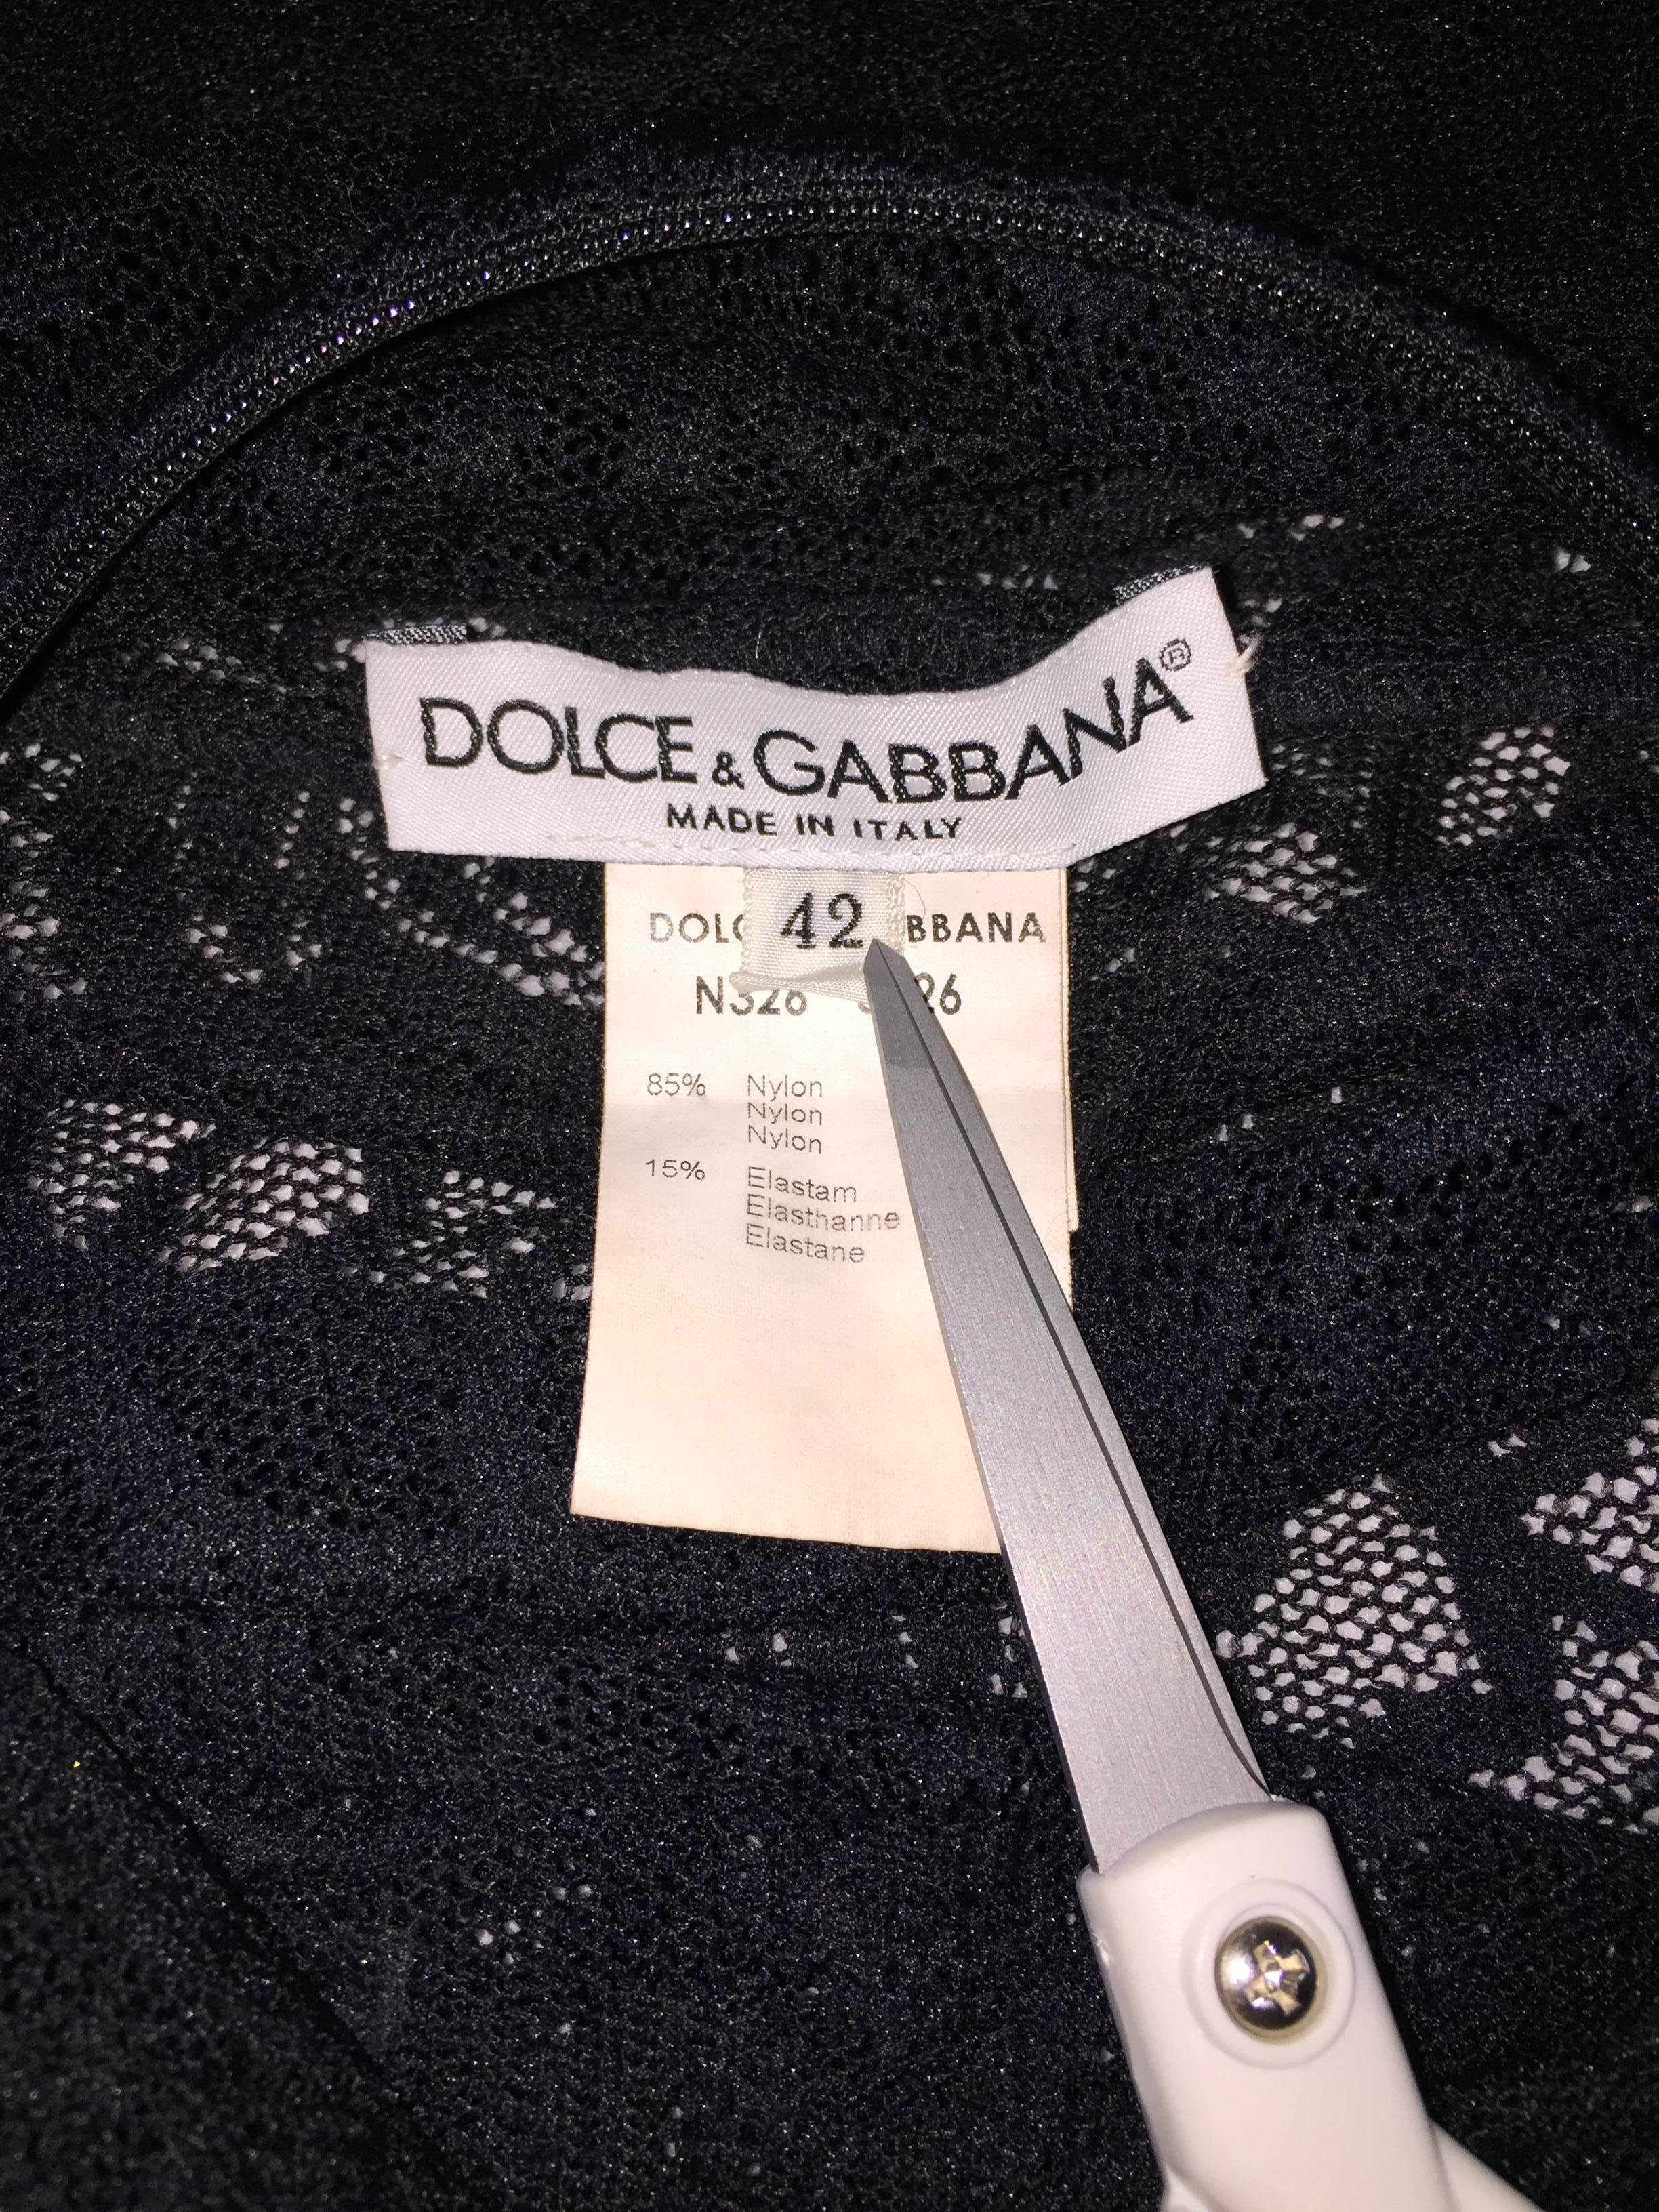 S/S 1999 Dolce & Gabbana Black Sheer Mesh Lace Dress In Excellent Condition In Yukon, OK